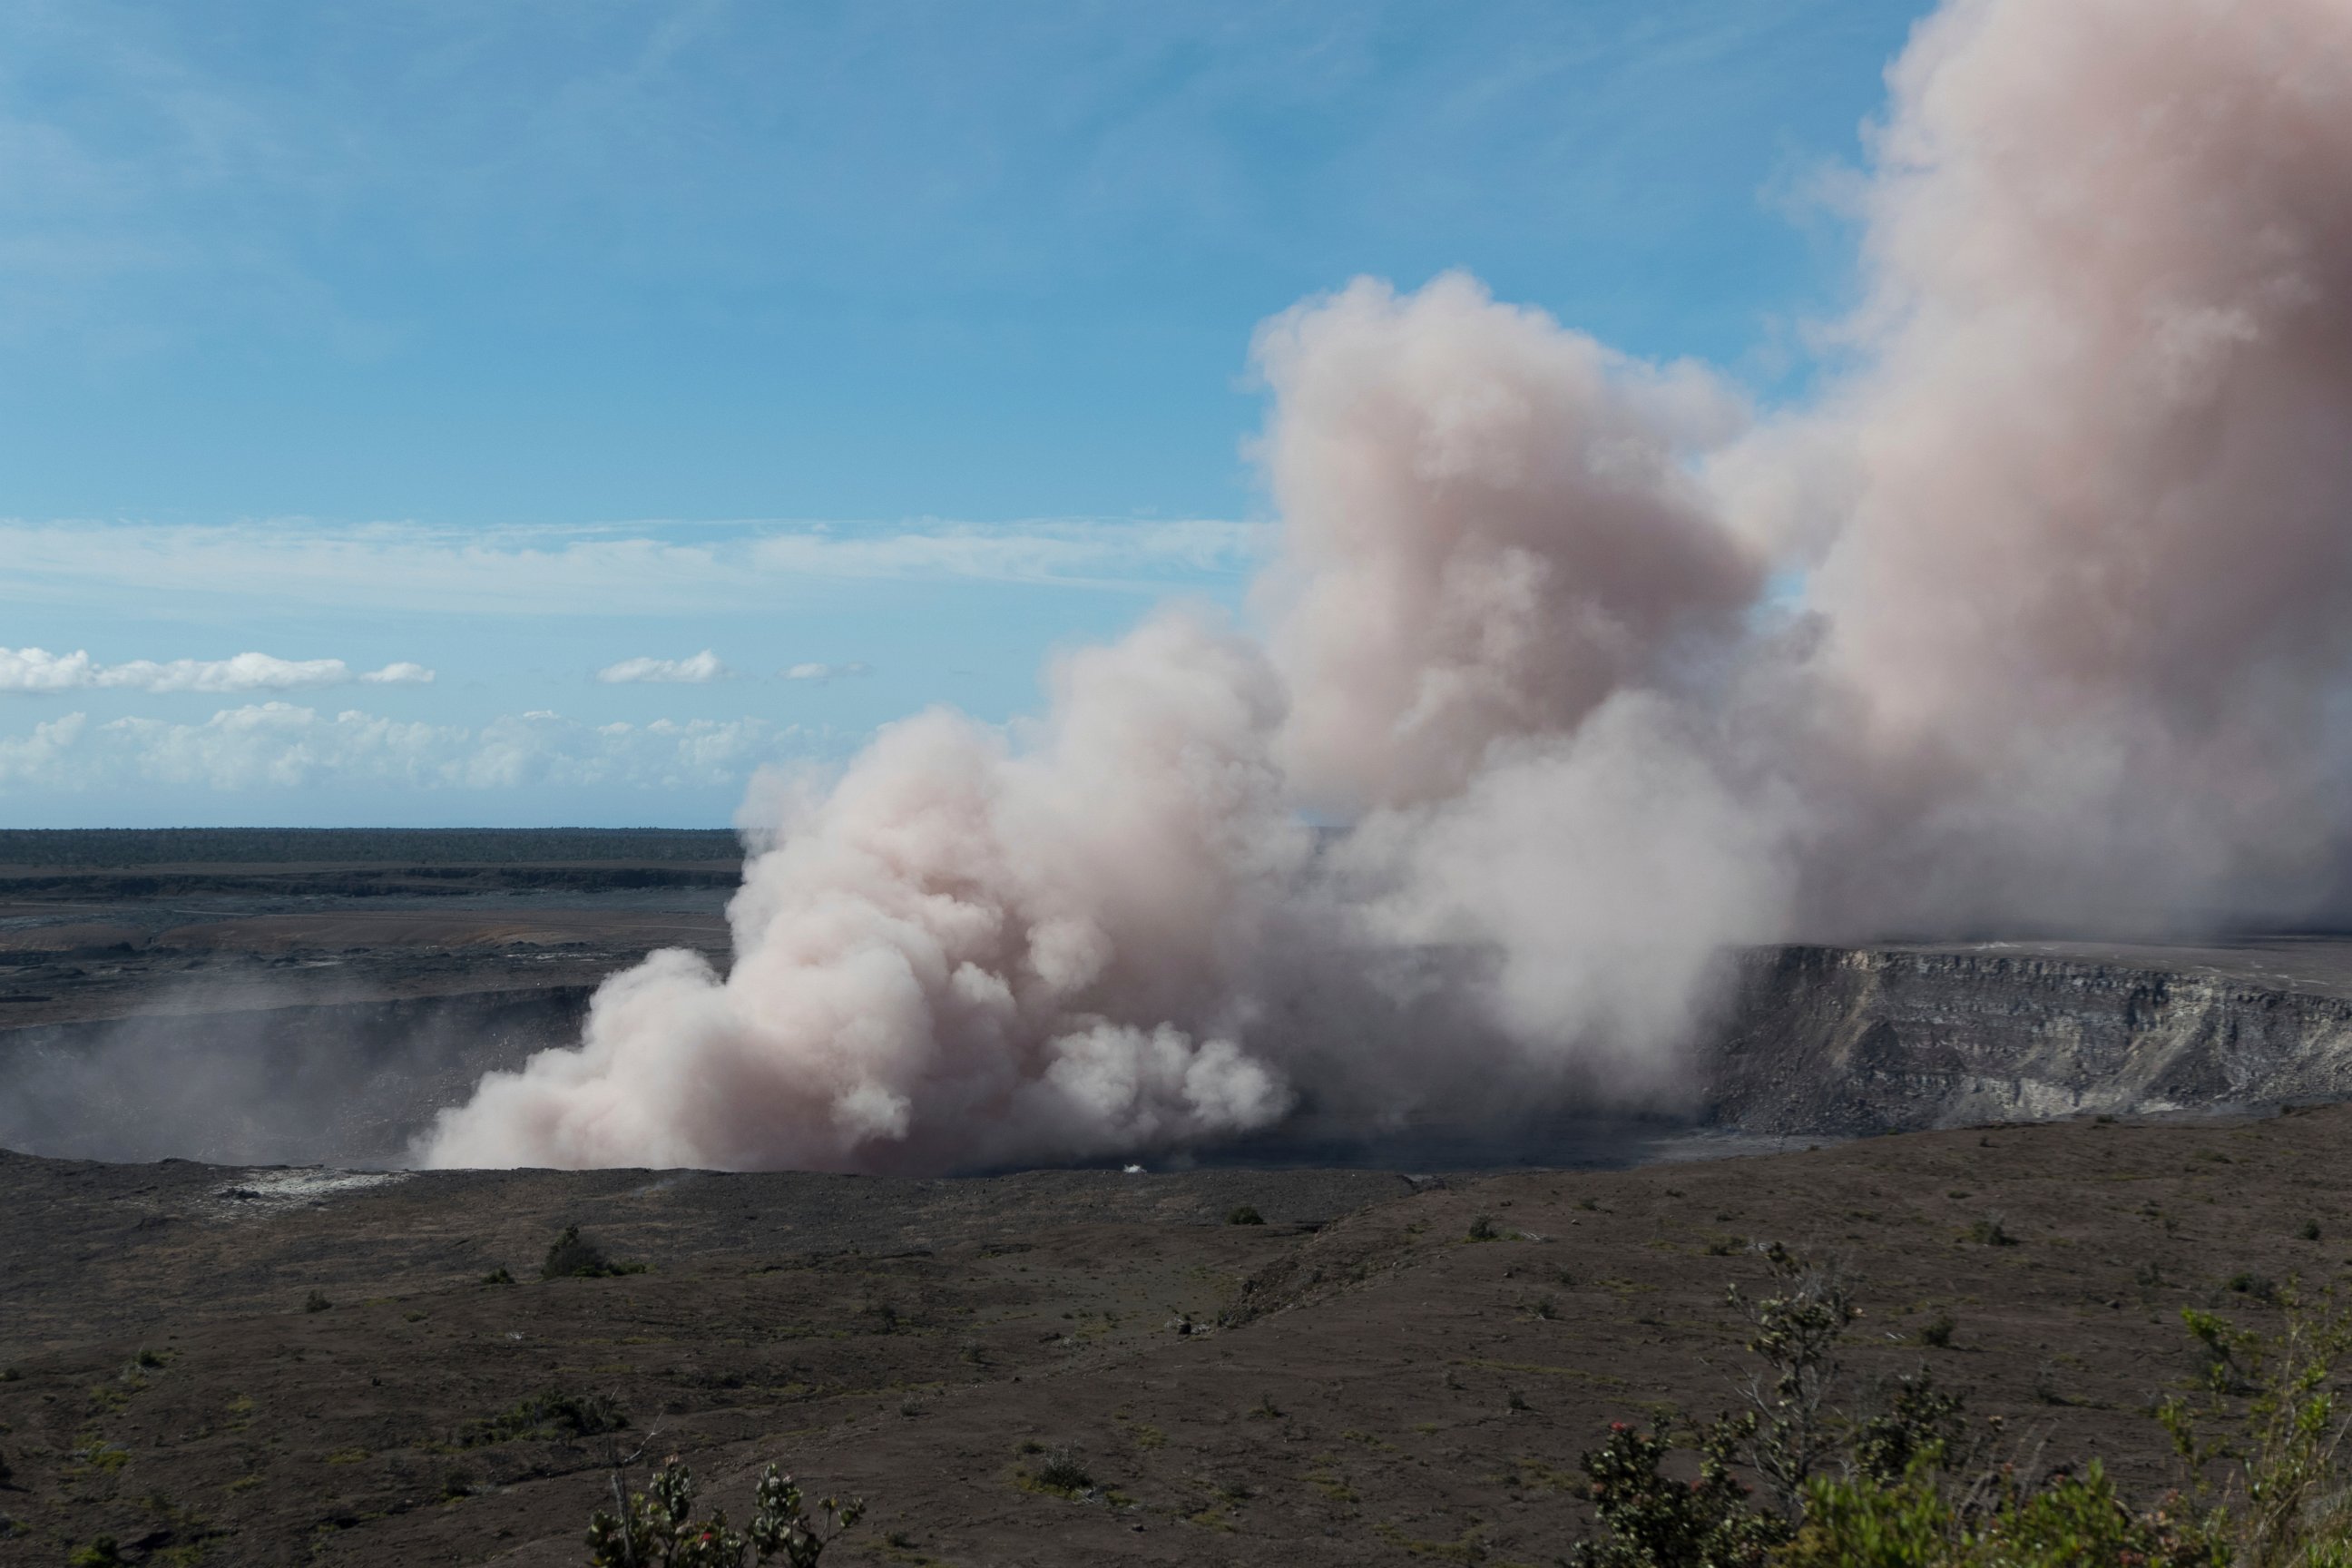 In this Friday, May 11, 2018 photo released by the U.S. Geological Survey, an ash plume rises from the Overlook Vent in Halema'uma'u crater of the Kilauea volcano on the Big Island of Hawaii.